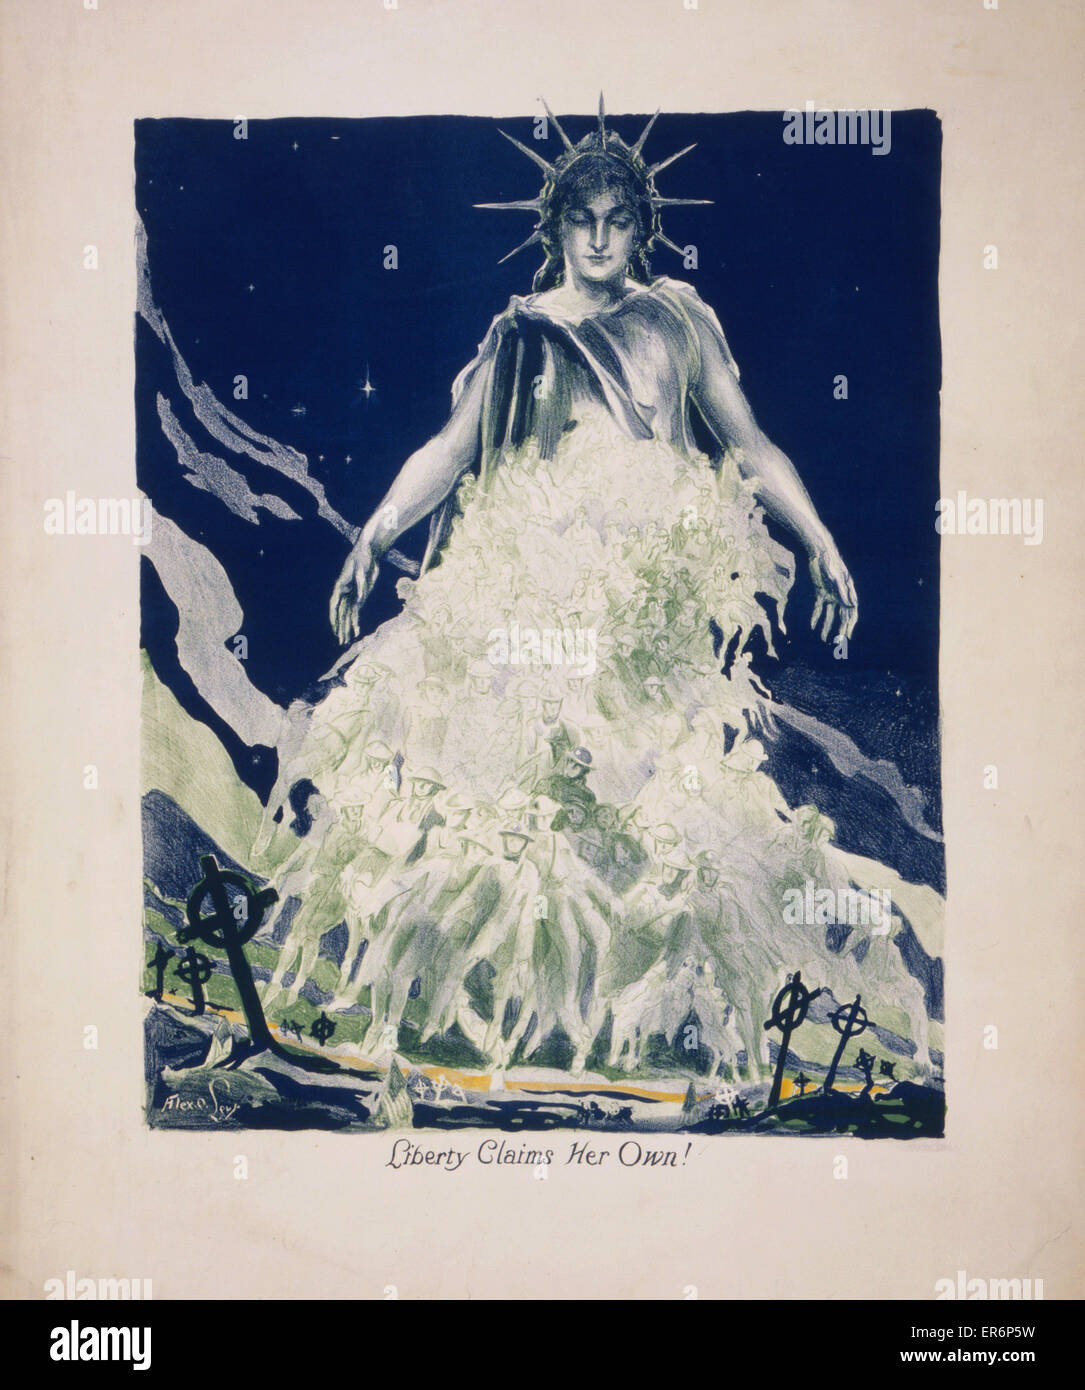 Liberty claims her own!. Allegory showing the figure of Liberty gathering up the specters of fallen soldiers from a cemetery. Date 1917 or 1918. Stock Photo